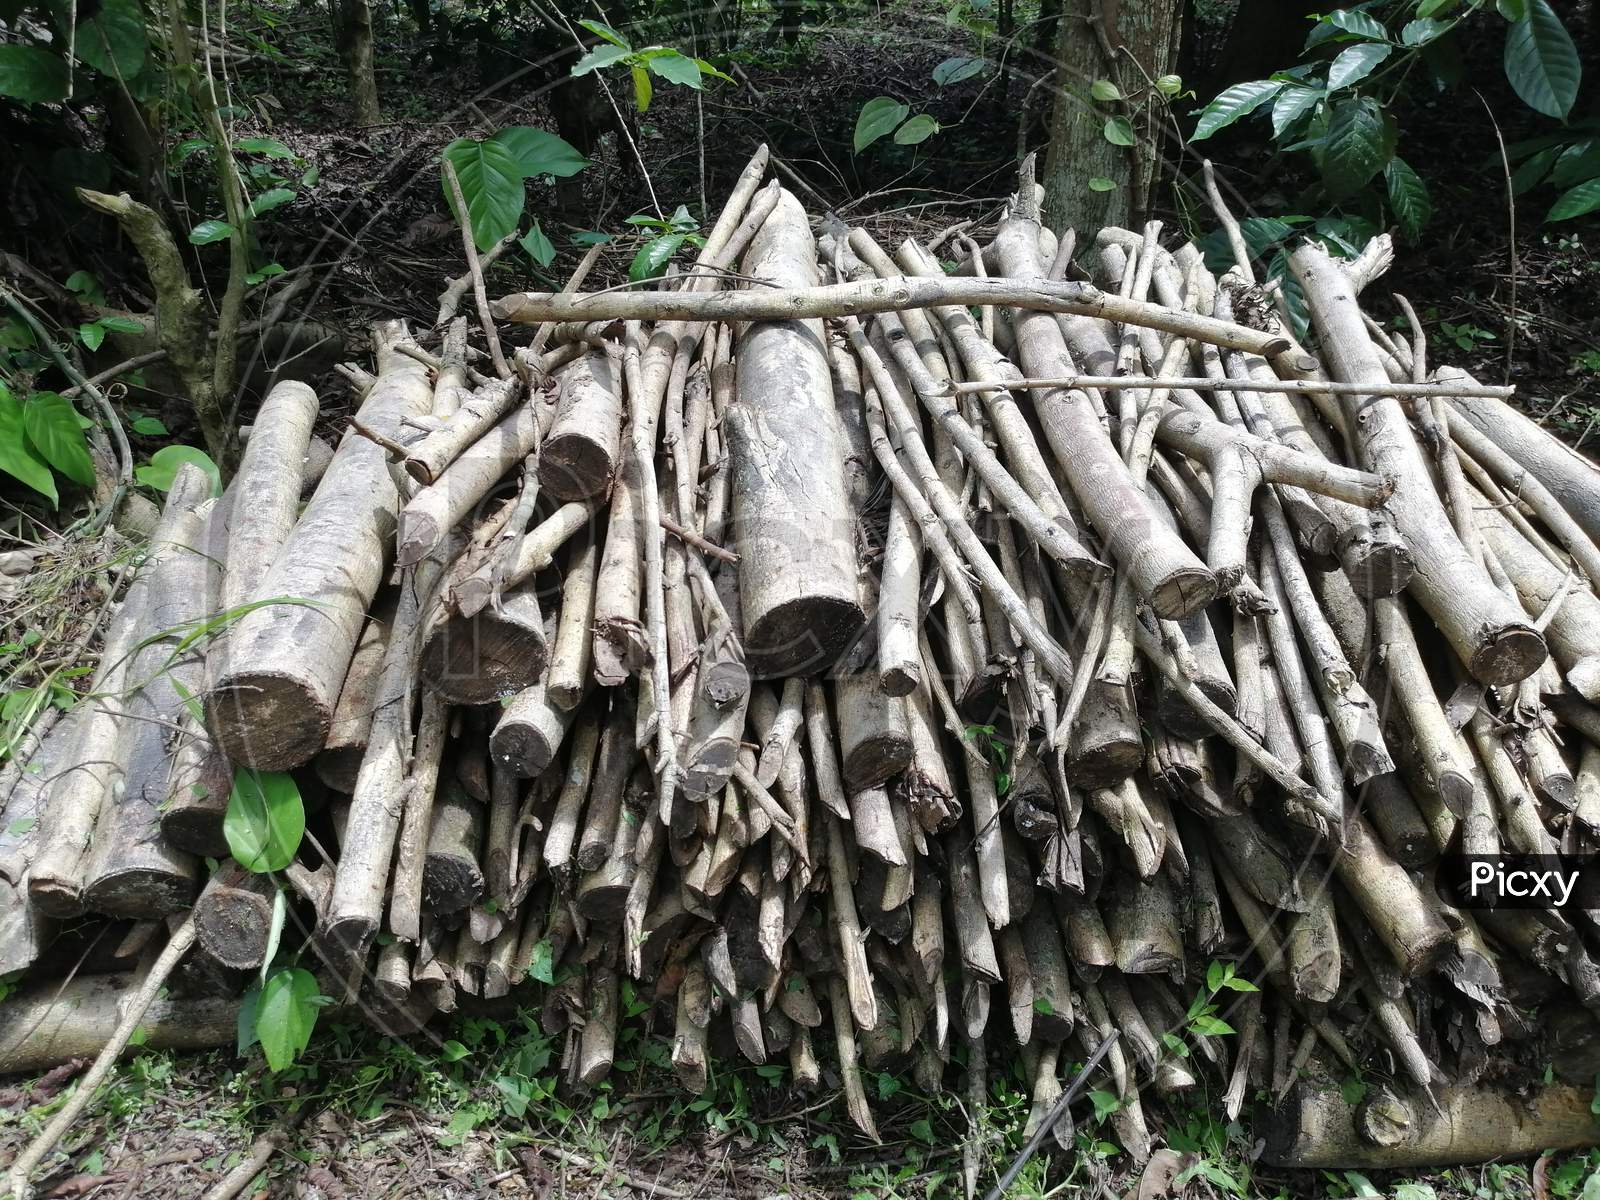 Trunks And Cut Branches Of Tree Kept Arranged In Order Which Later Will Be Used As A Firewood In Remote Village For Cooking